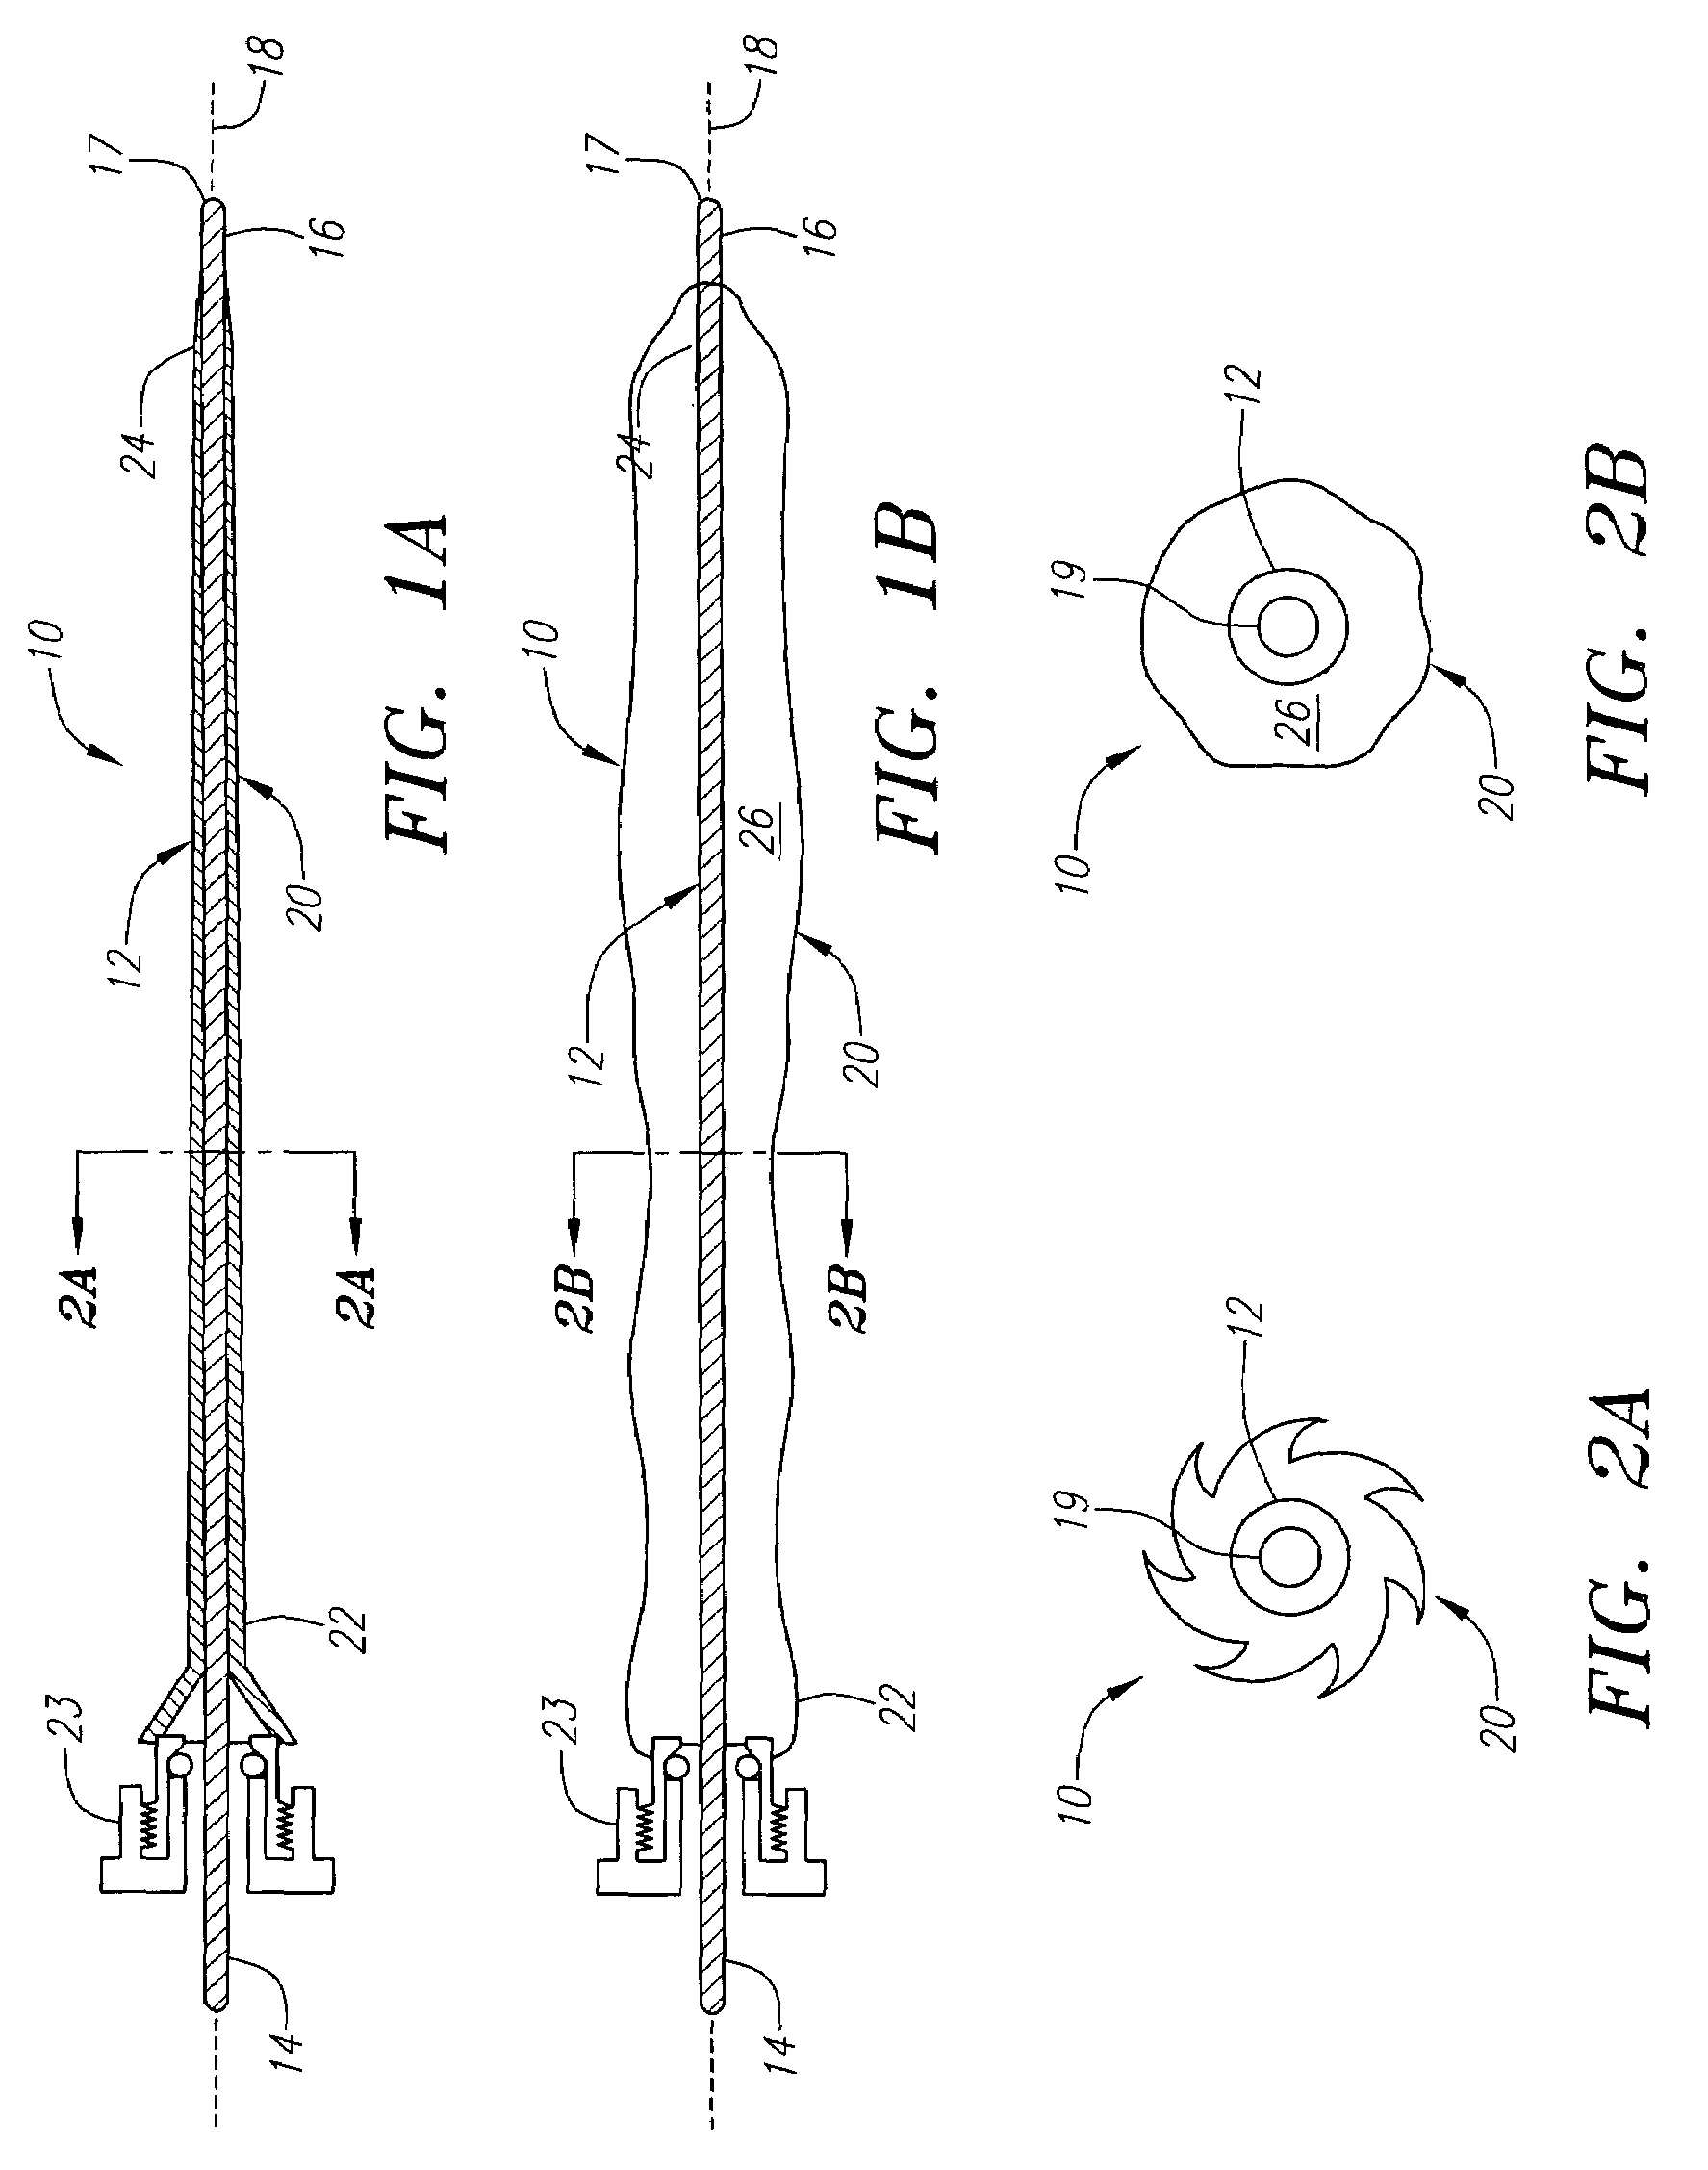 Expandable guide sheath and apparatus with distal protection and methods for use